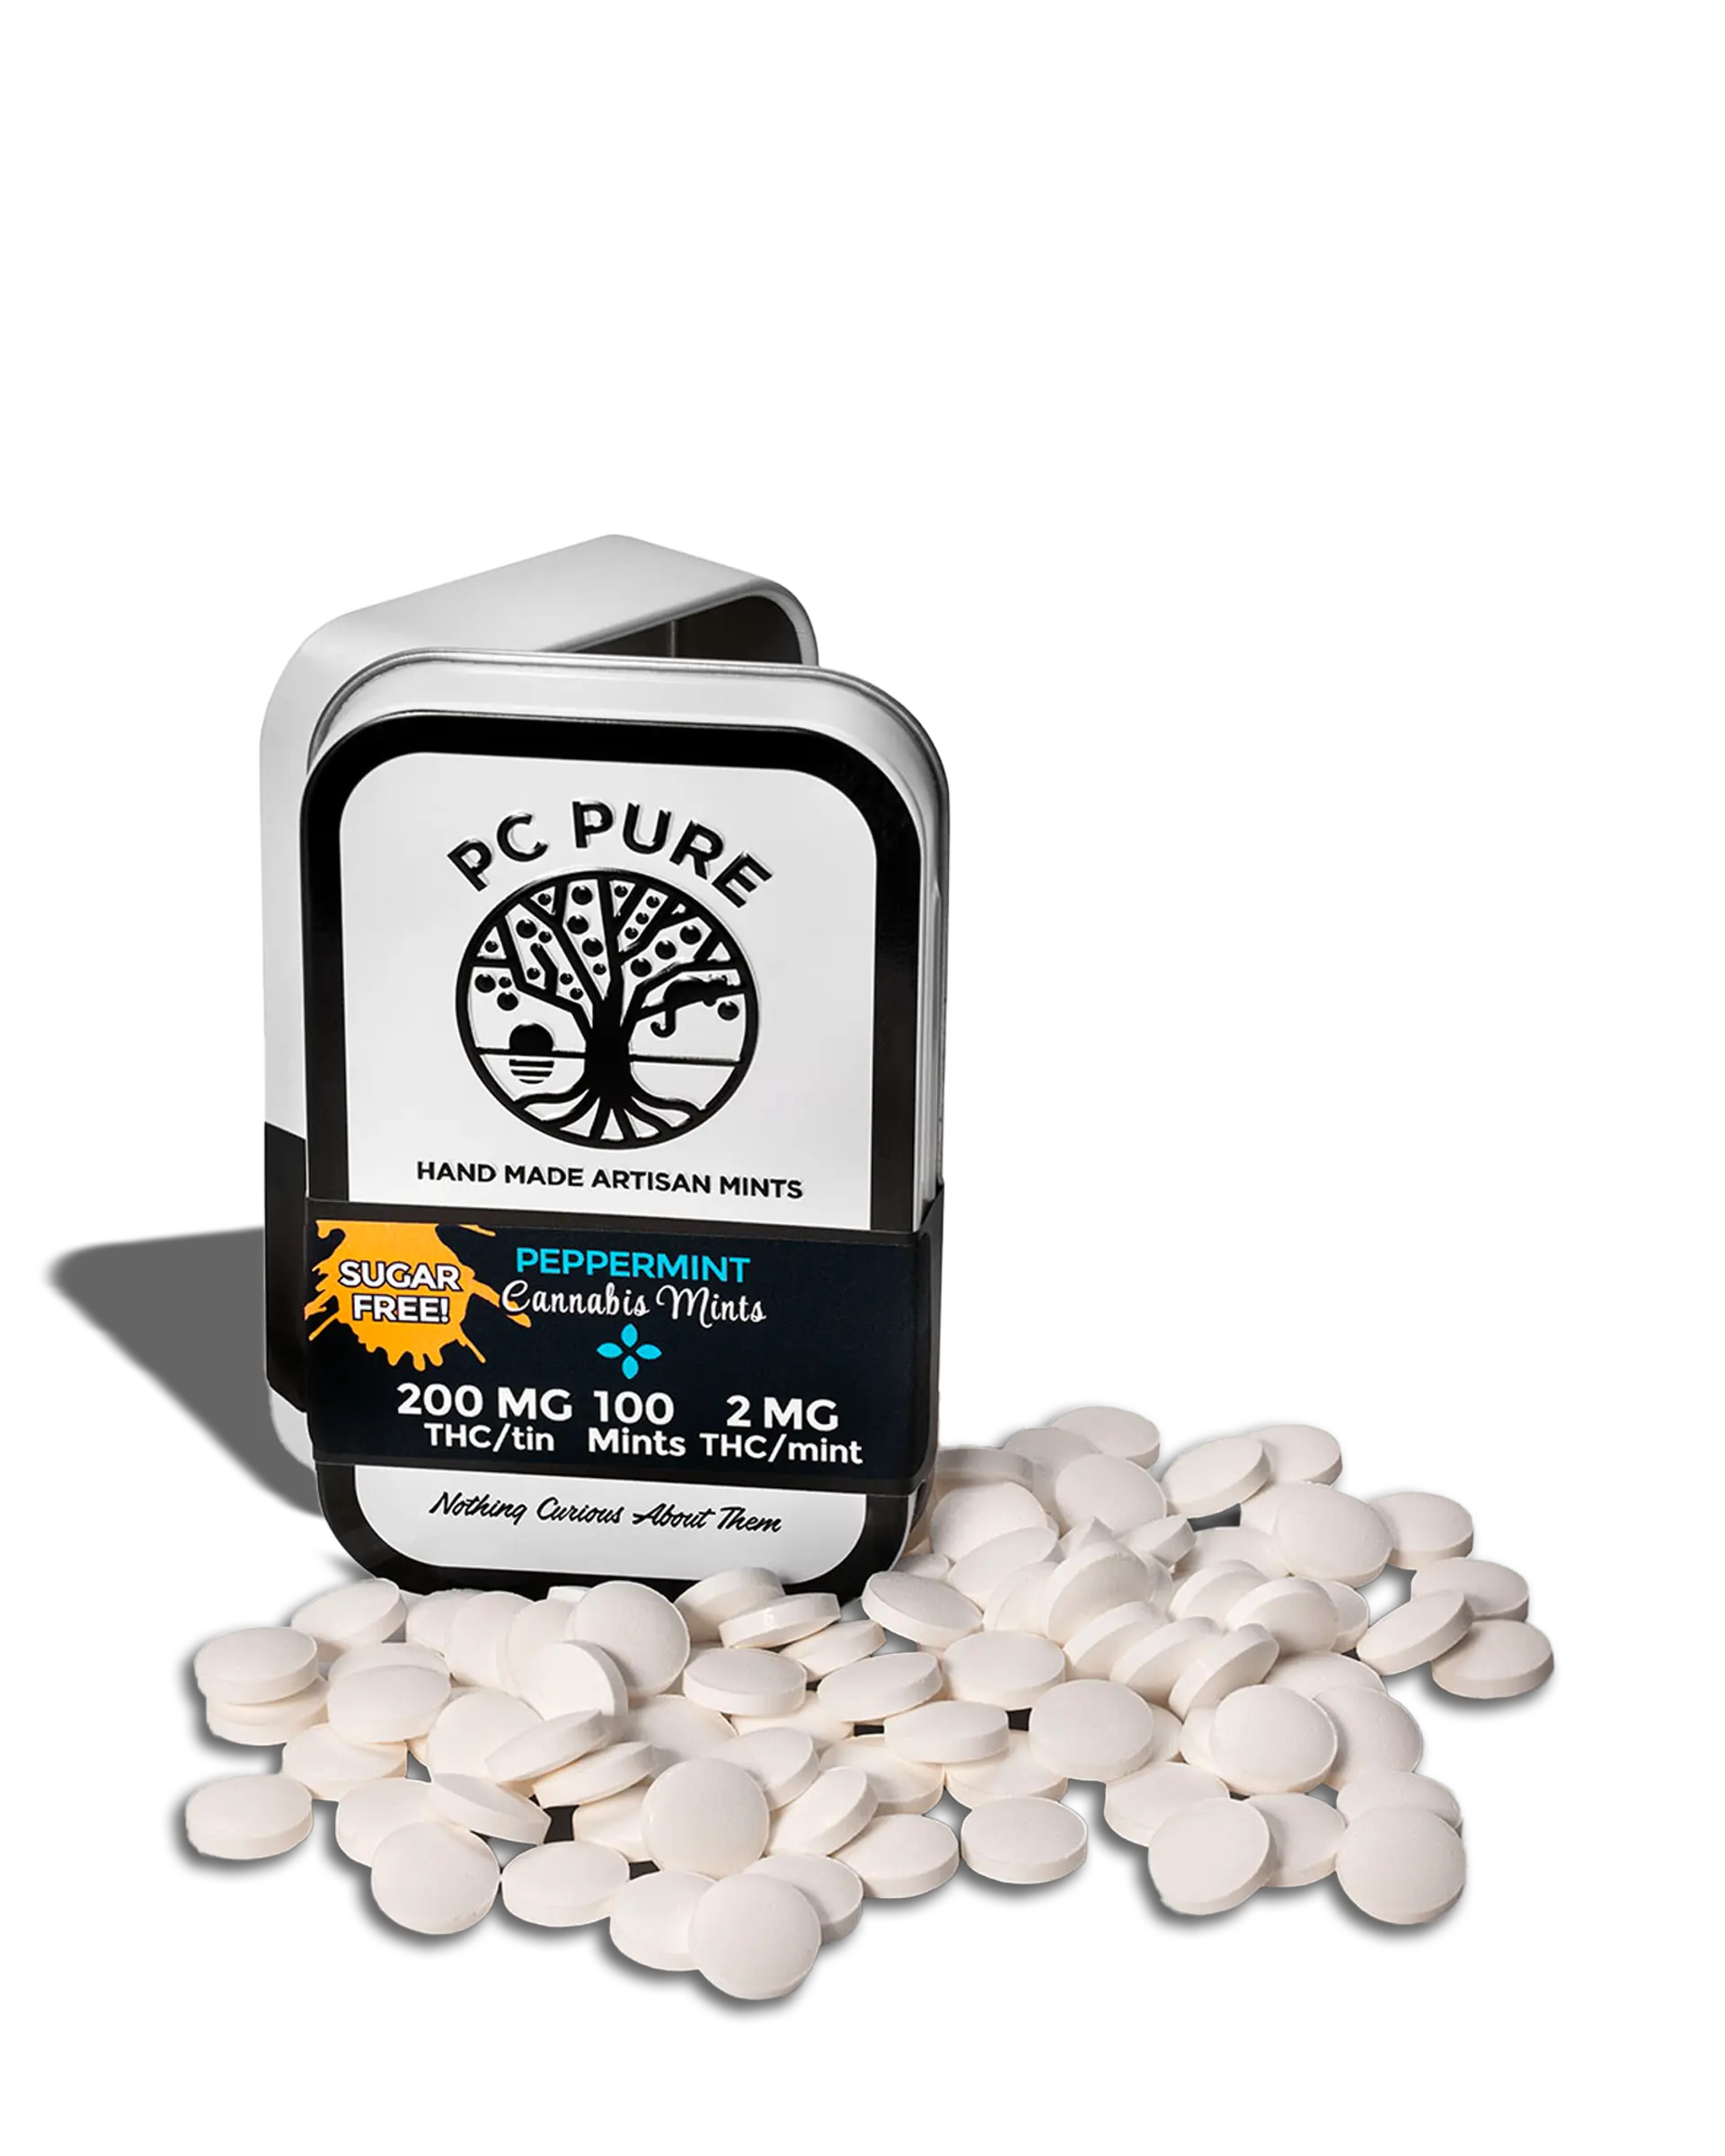 Peppermint Cannabis Mints 100x2mg, 1 of 1